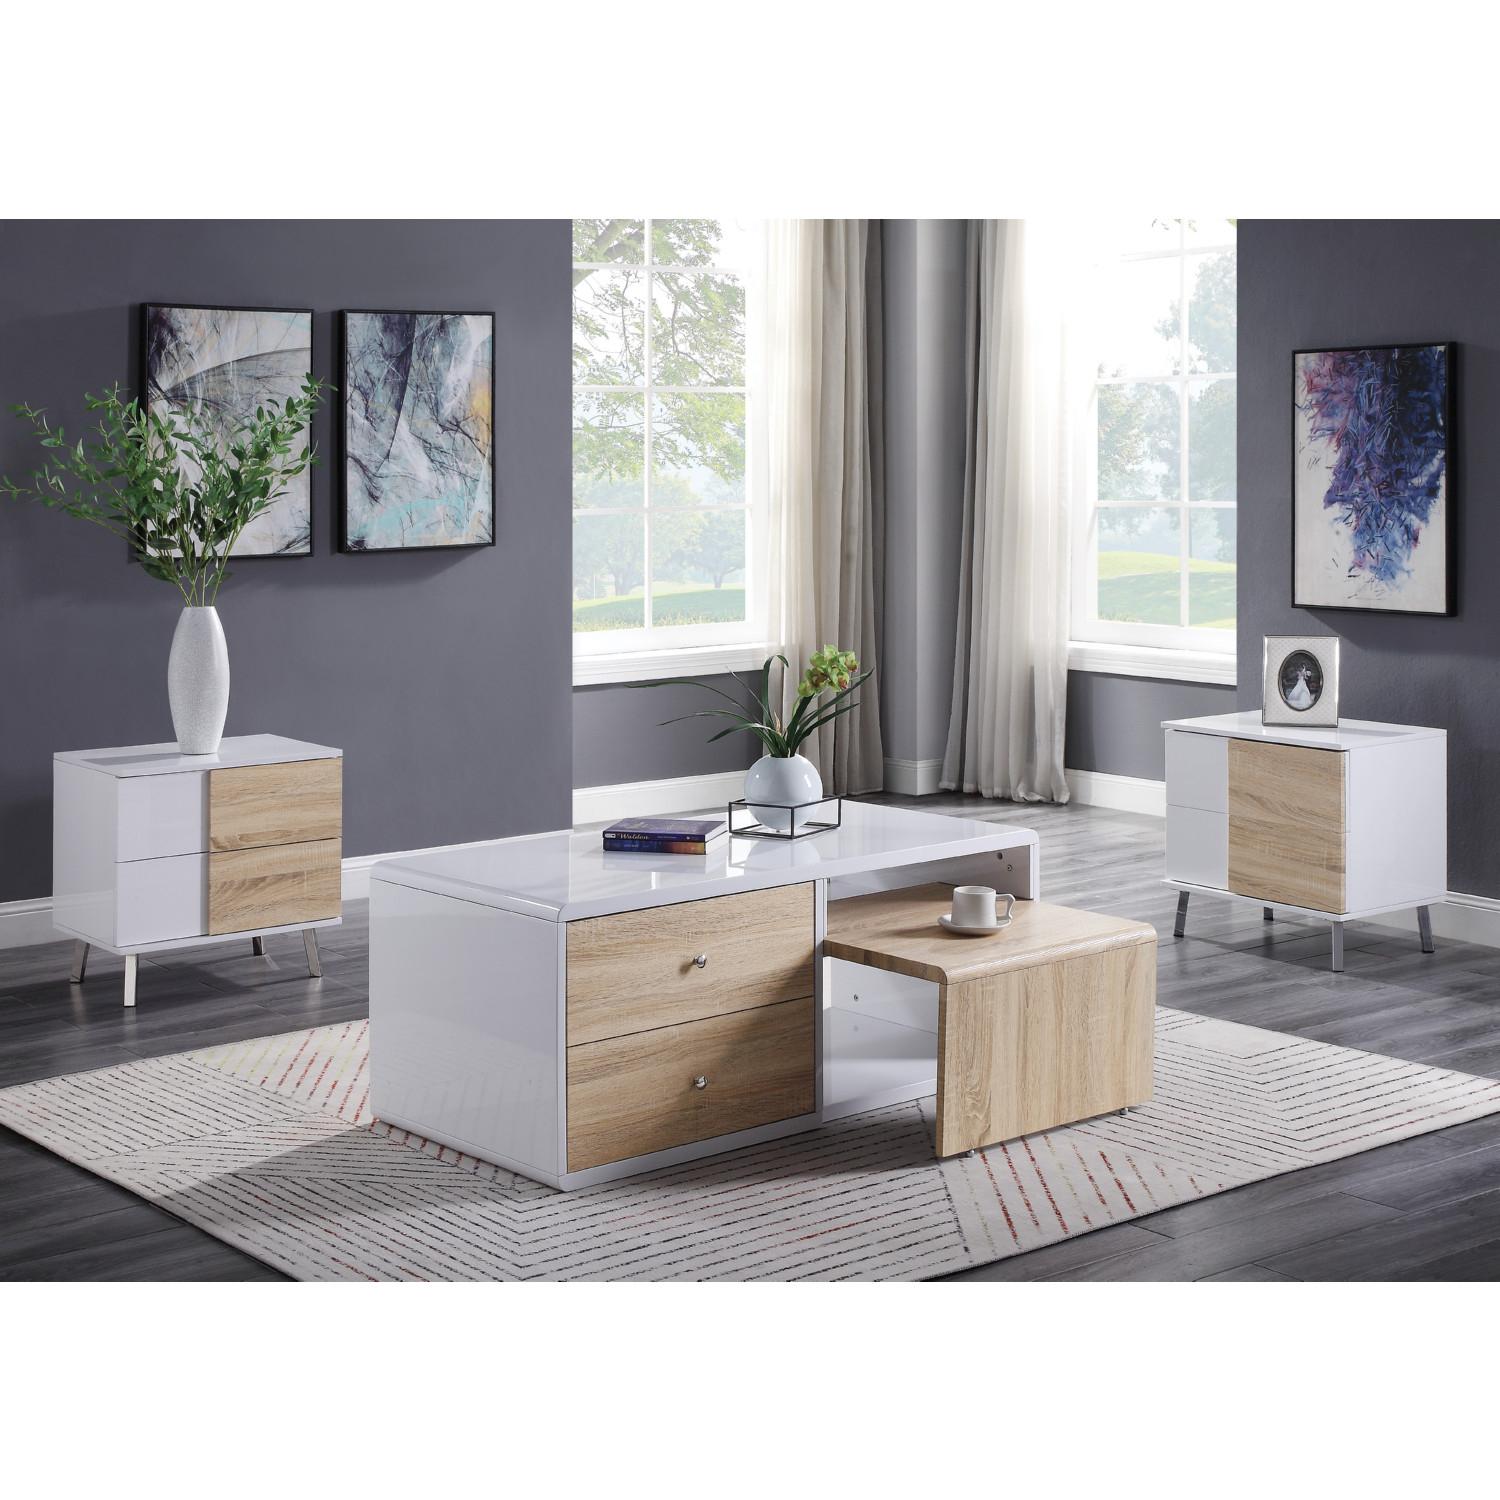 Modern Coffee Table and 2 End Tables Verux 84930-3pcs in White 